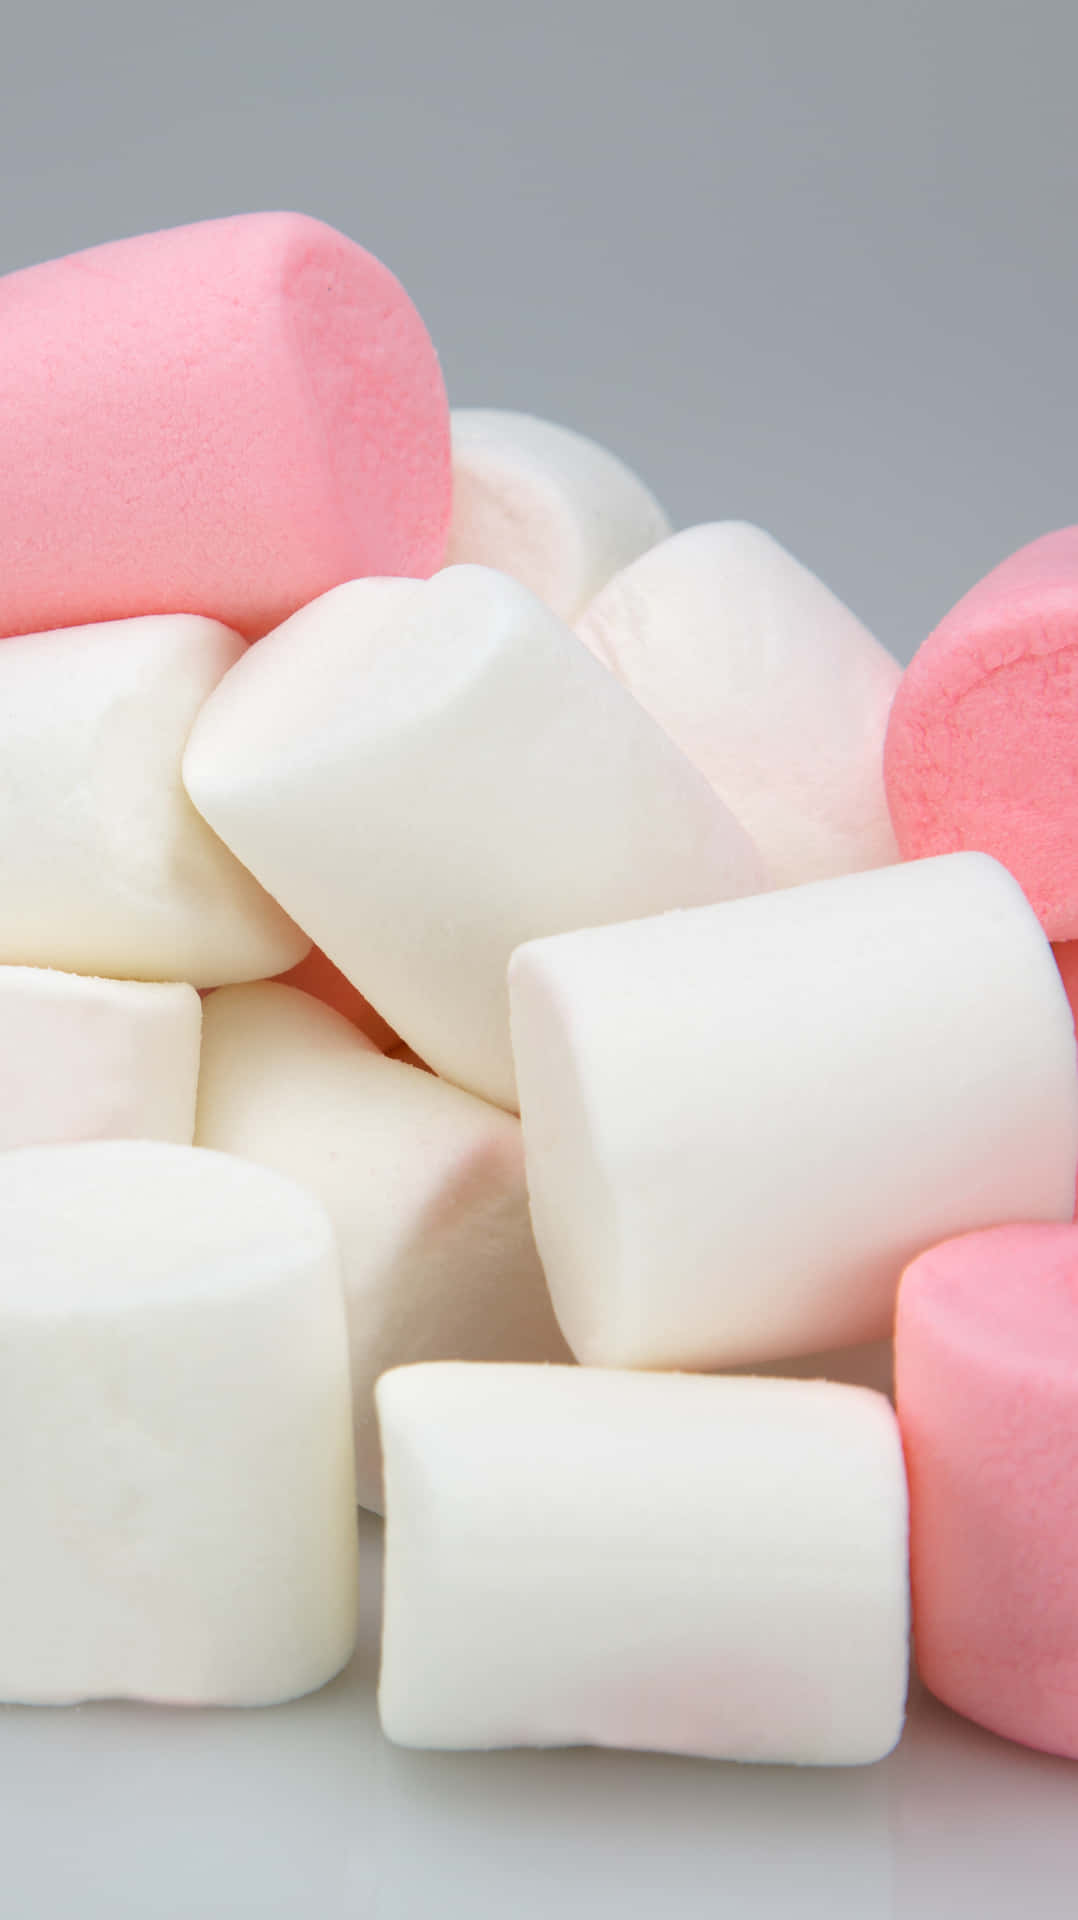 A Pile Of Pink And White Marshmallows On A Gray Background Wallpaper